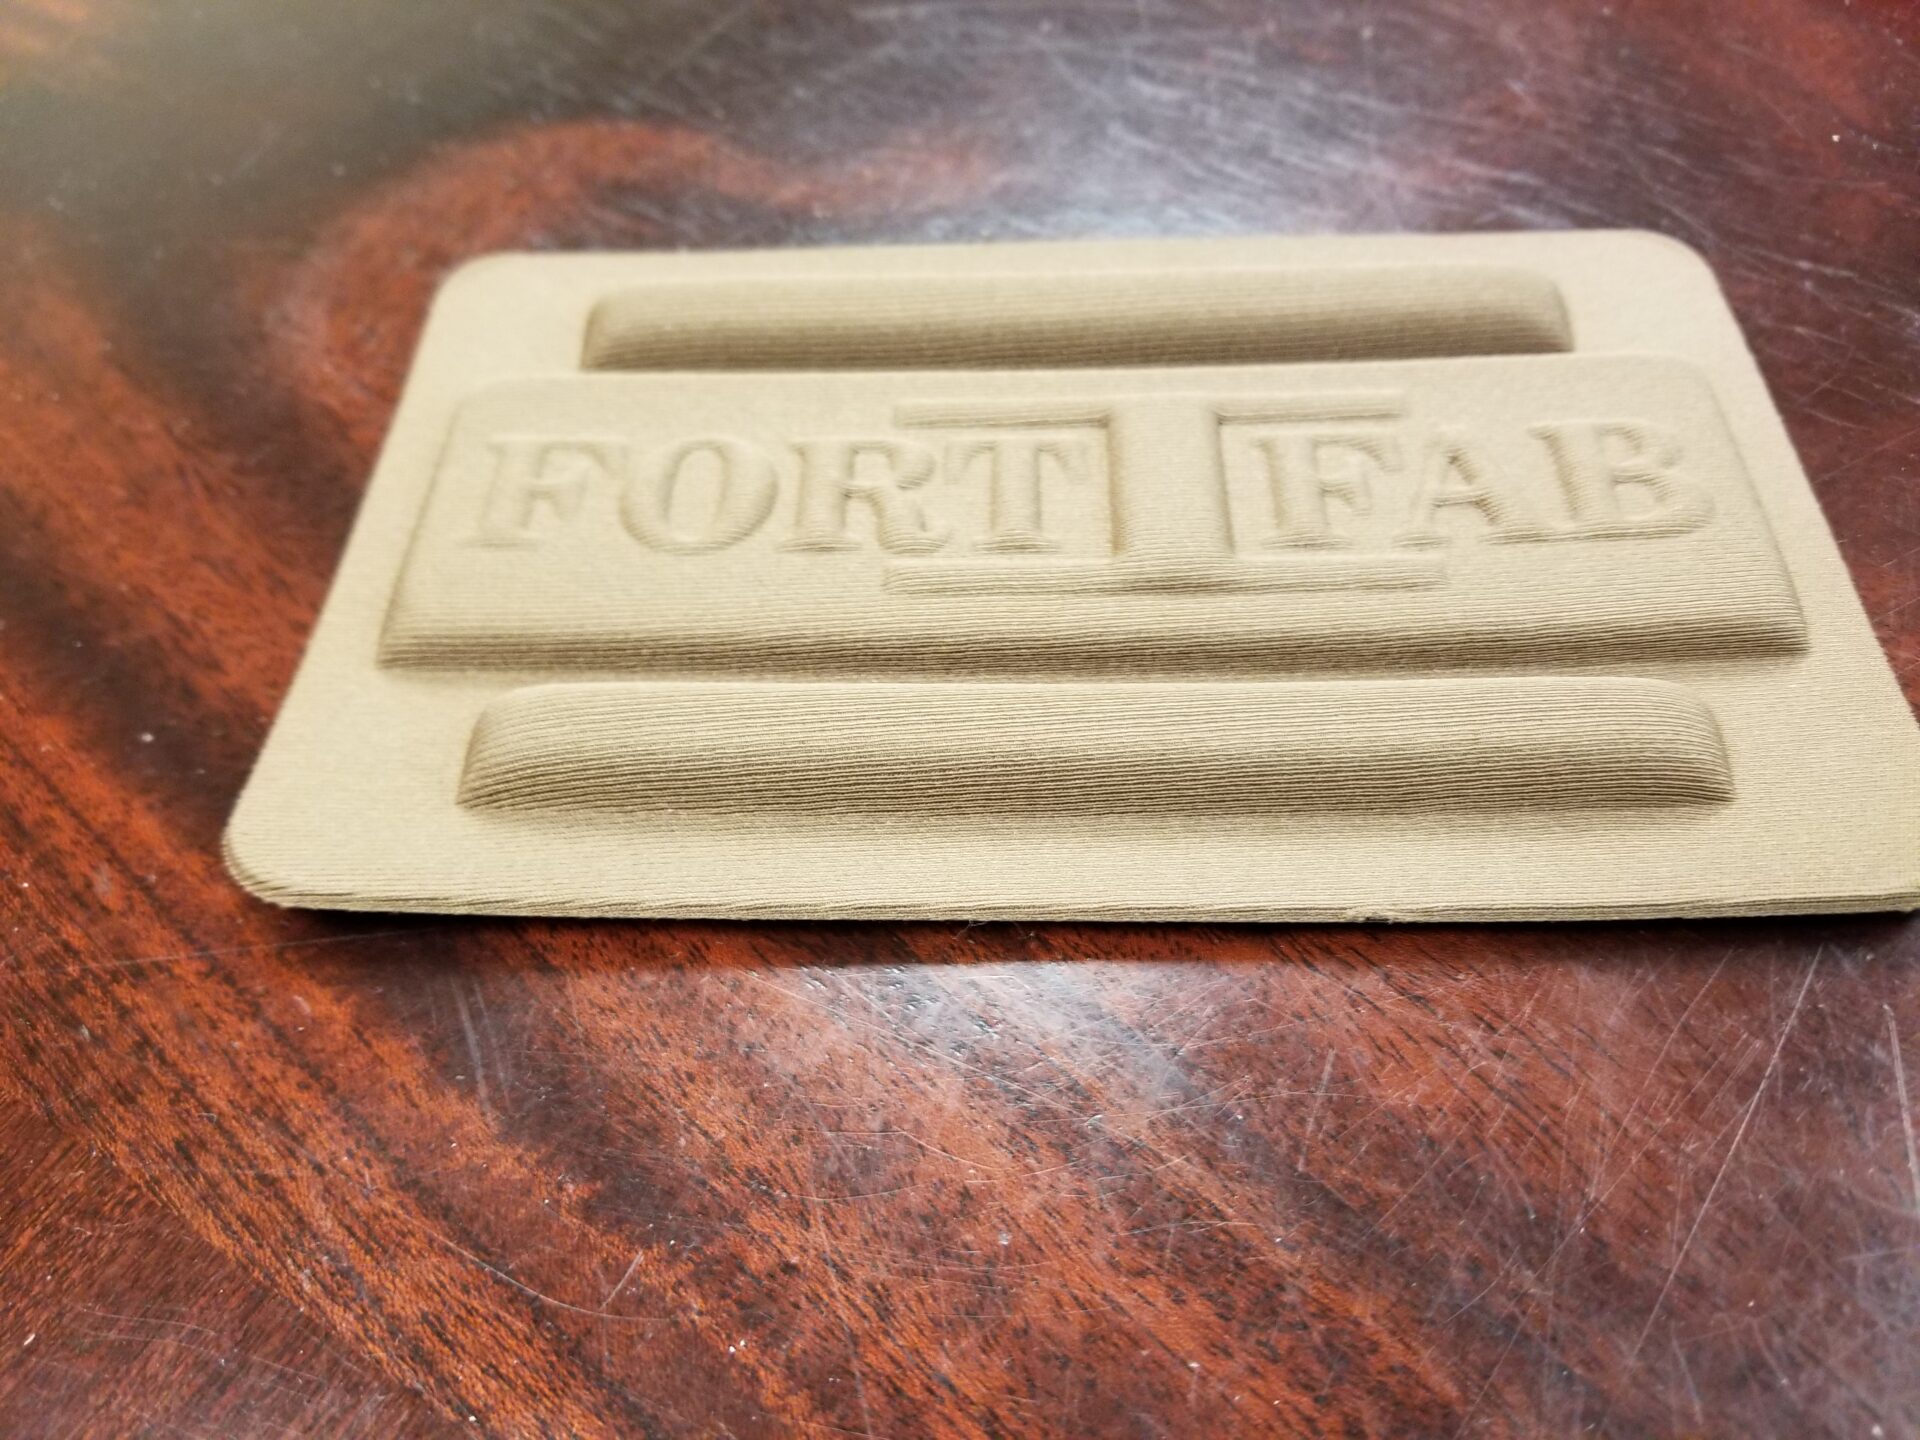 plastic product with Fortifab text